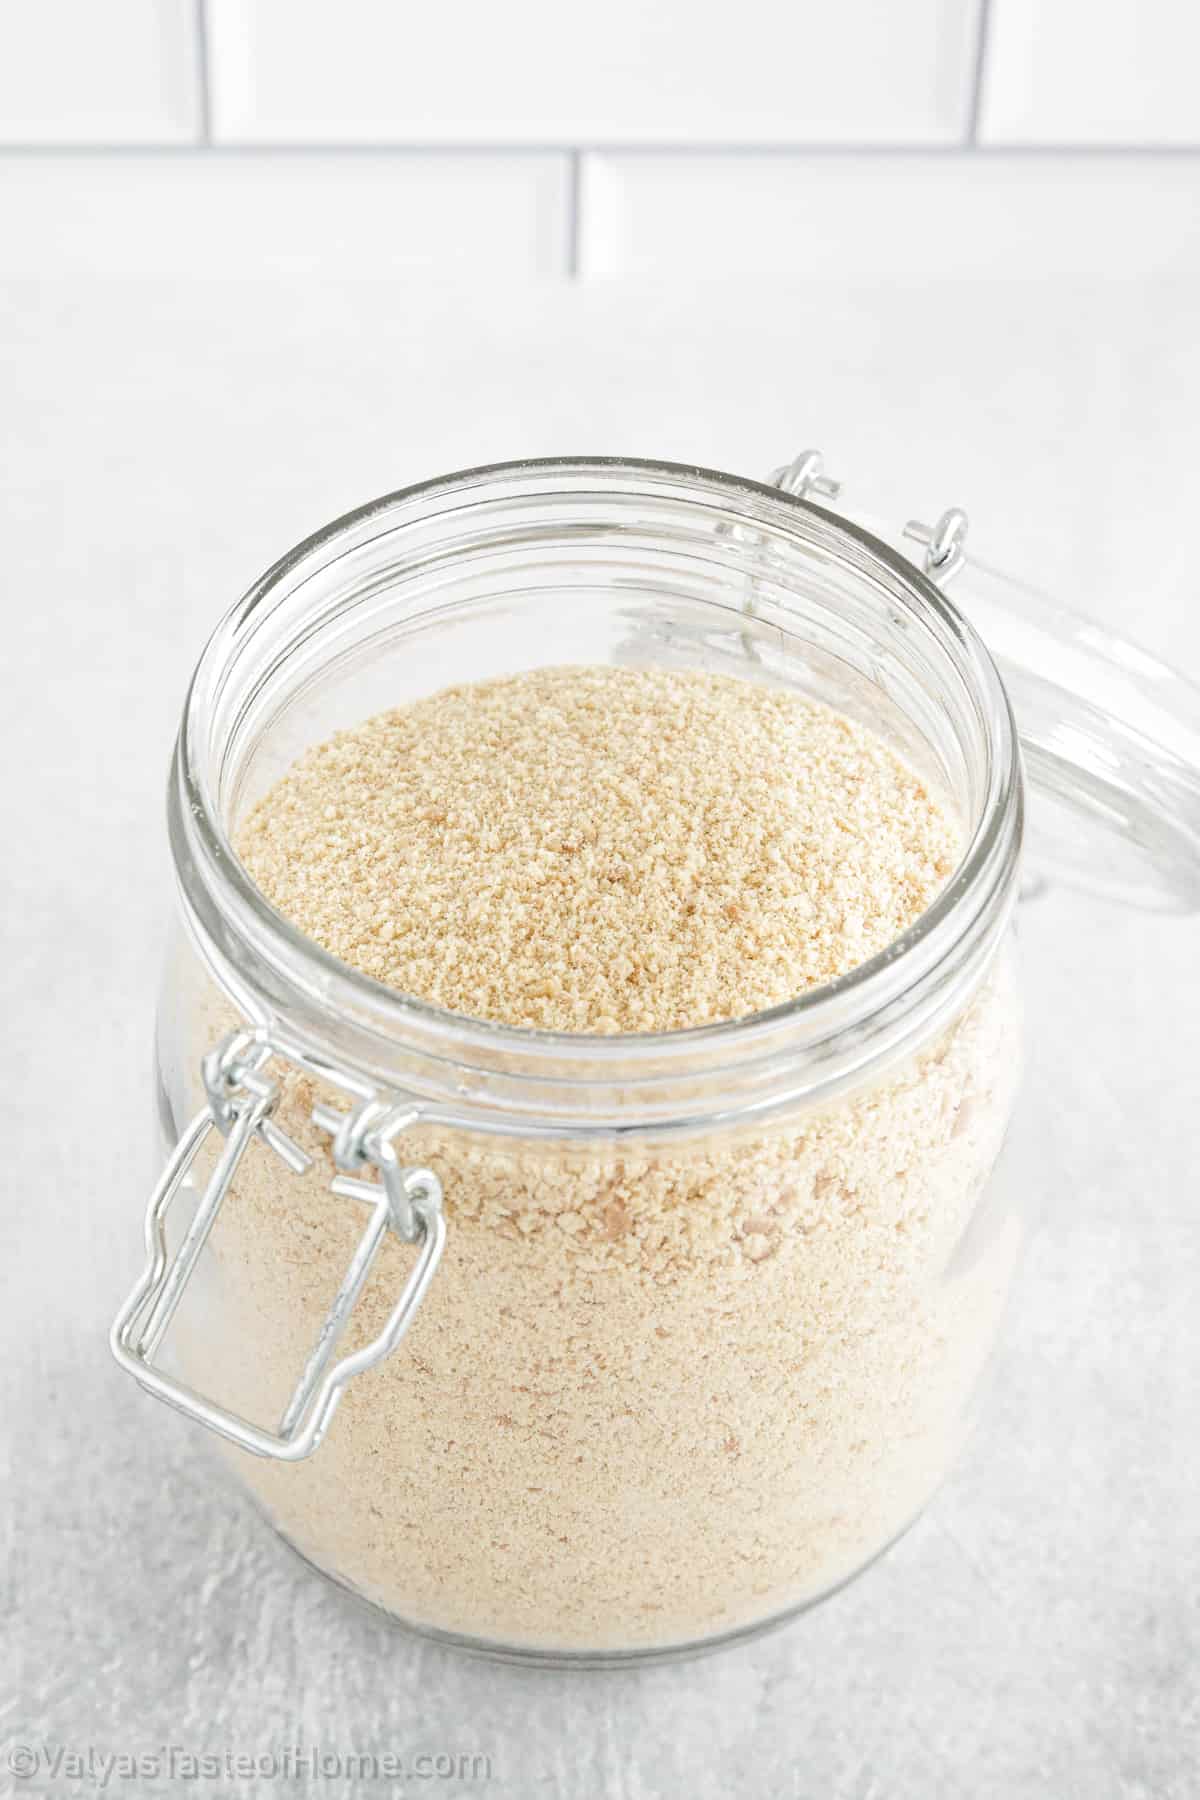 Homemade bread crumbs can be used in a variety of recipes, from casseroles and meatloaves to fish and vegetables.